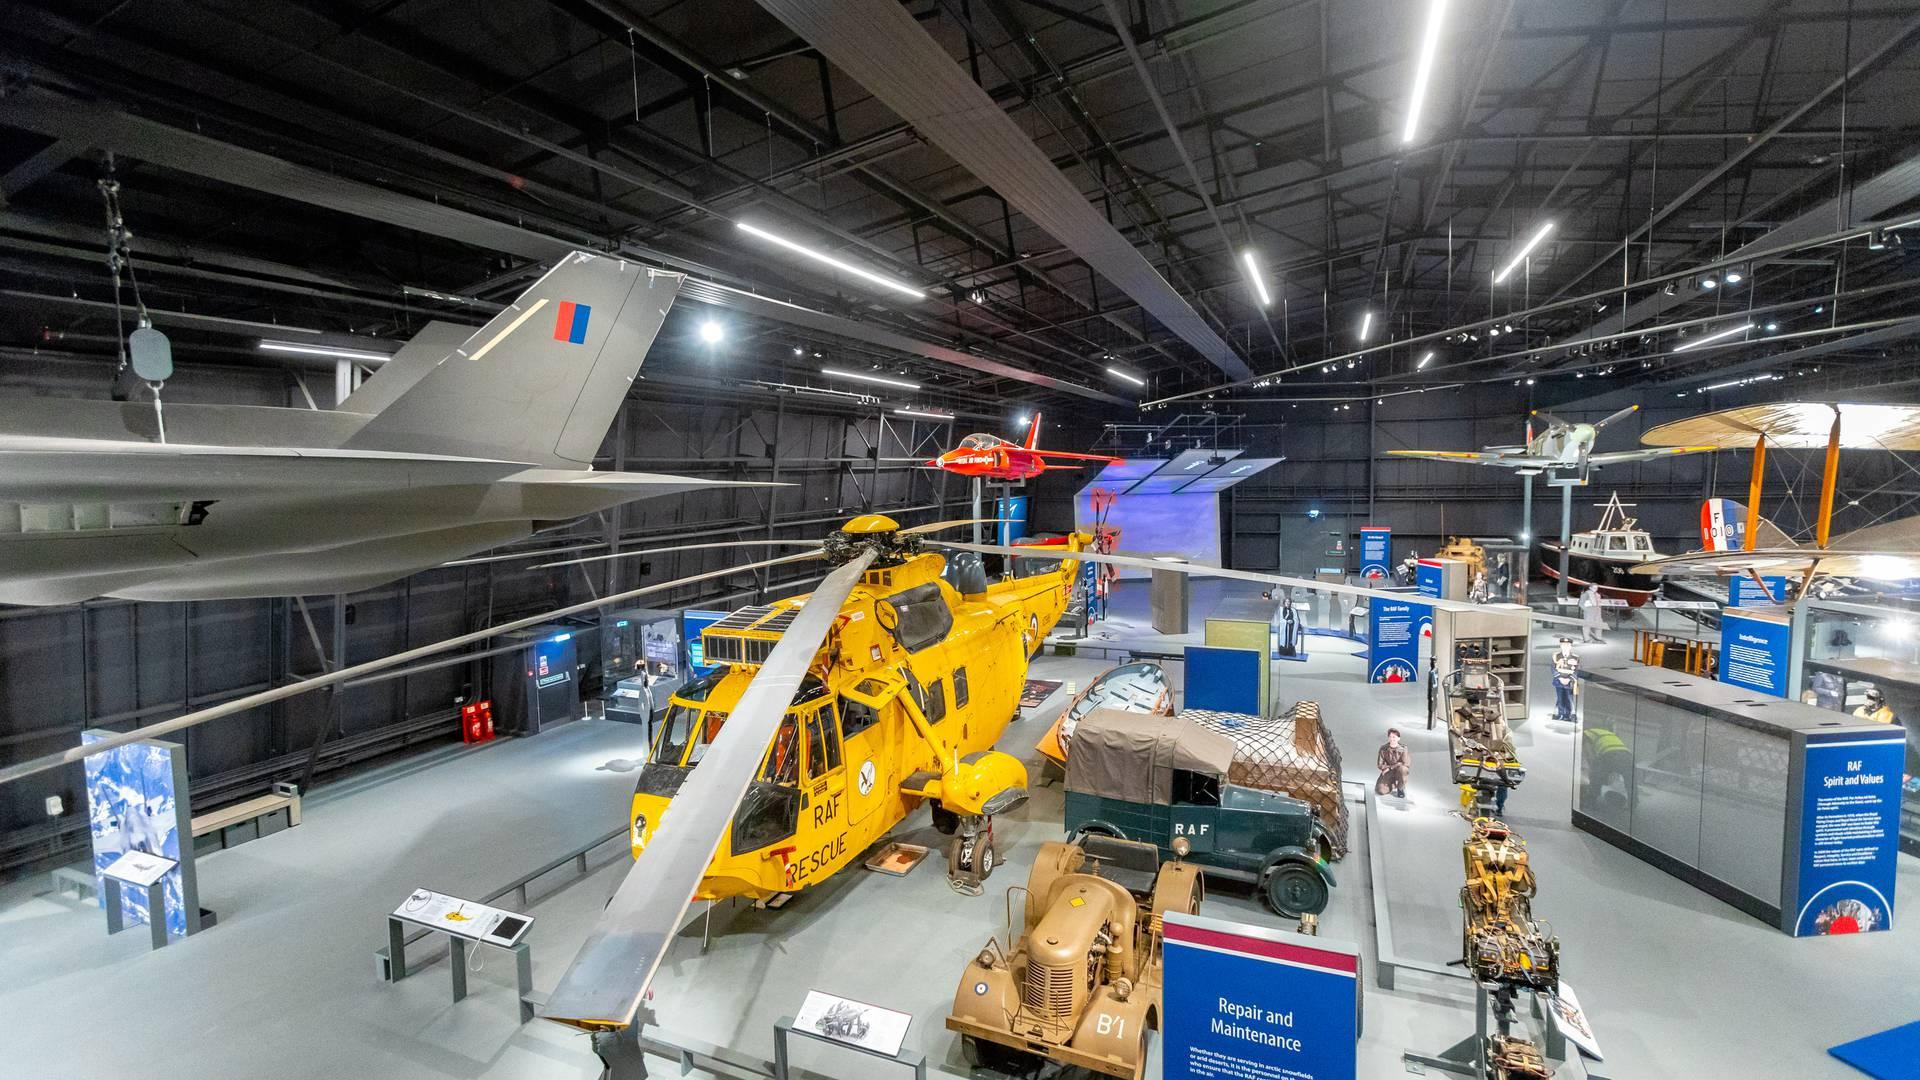 The Royal Air Force Museum photo